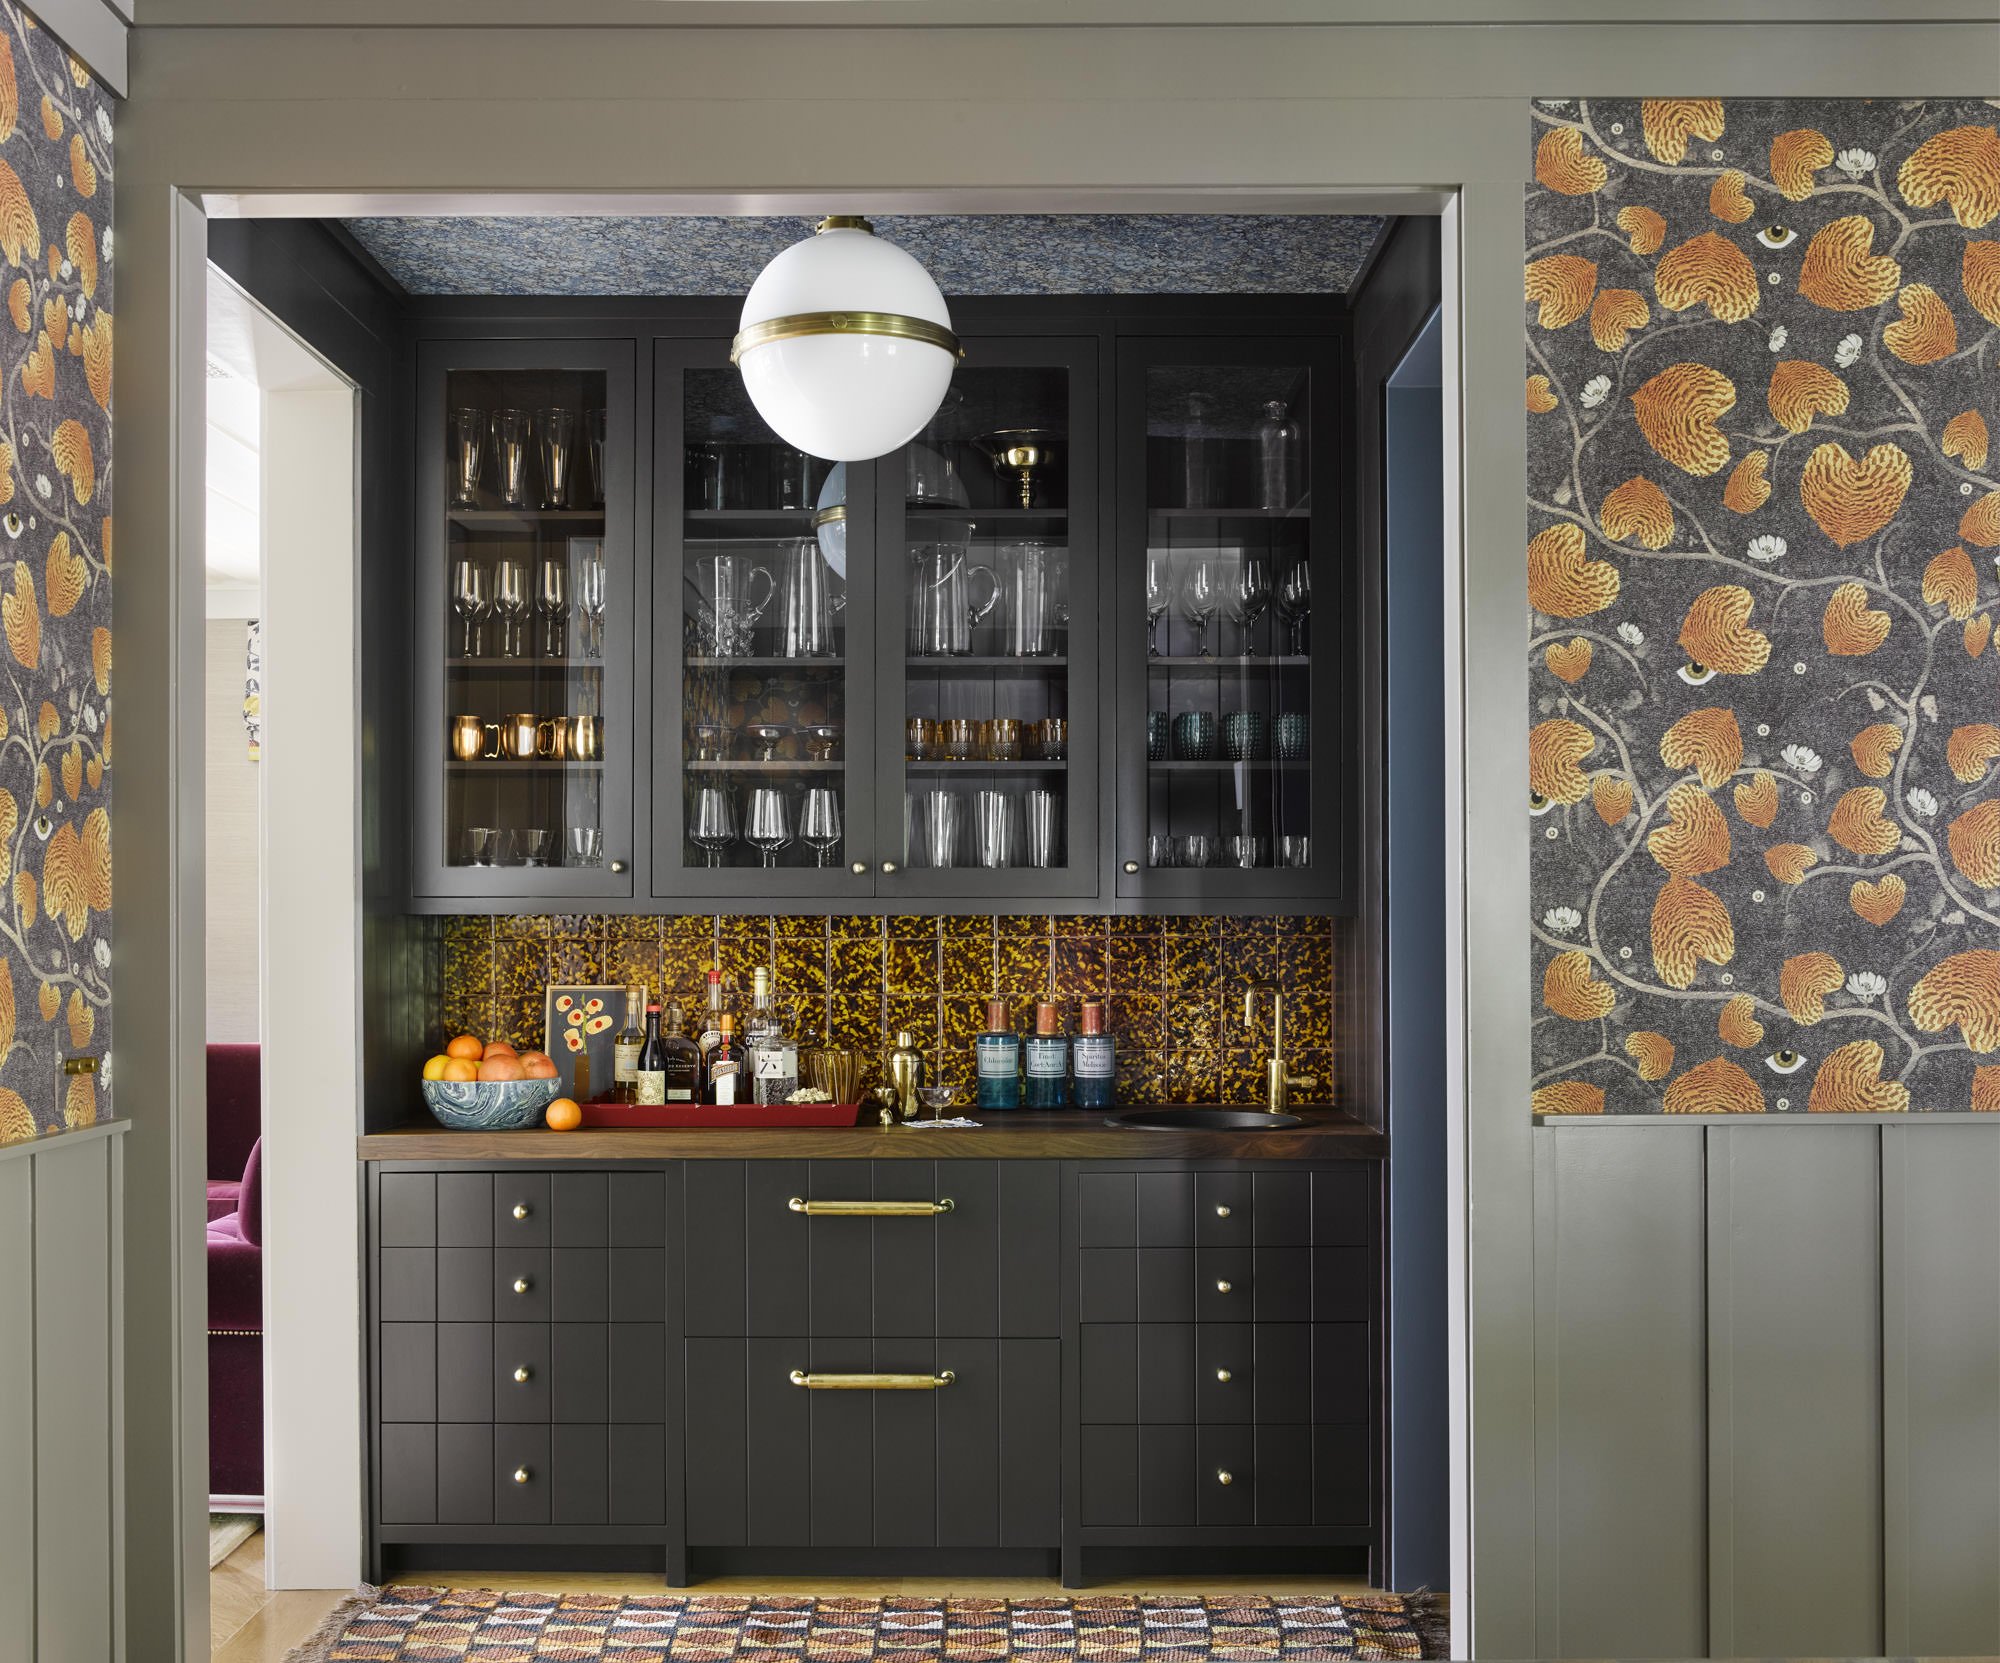   IN THE BAR, CABINETRY CONCEALING THE FRIDGE DRAWERS IS PAINTED FARROW &amp; BALL TANNER’S BROWN NO. 255. A VINTAGE RUNNER FROM RUG &amp; KILIM, TORTOISE CERAMIC TILE BACKSPLASH FROM BALINEUM, A PENDANT LIGHT FROM VISUAL COMFORT, MARBLEIZED WALLPAPE